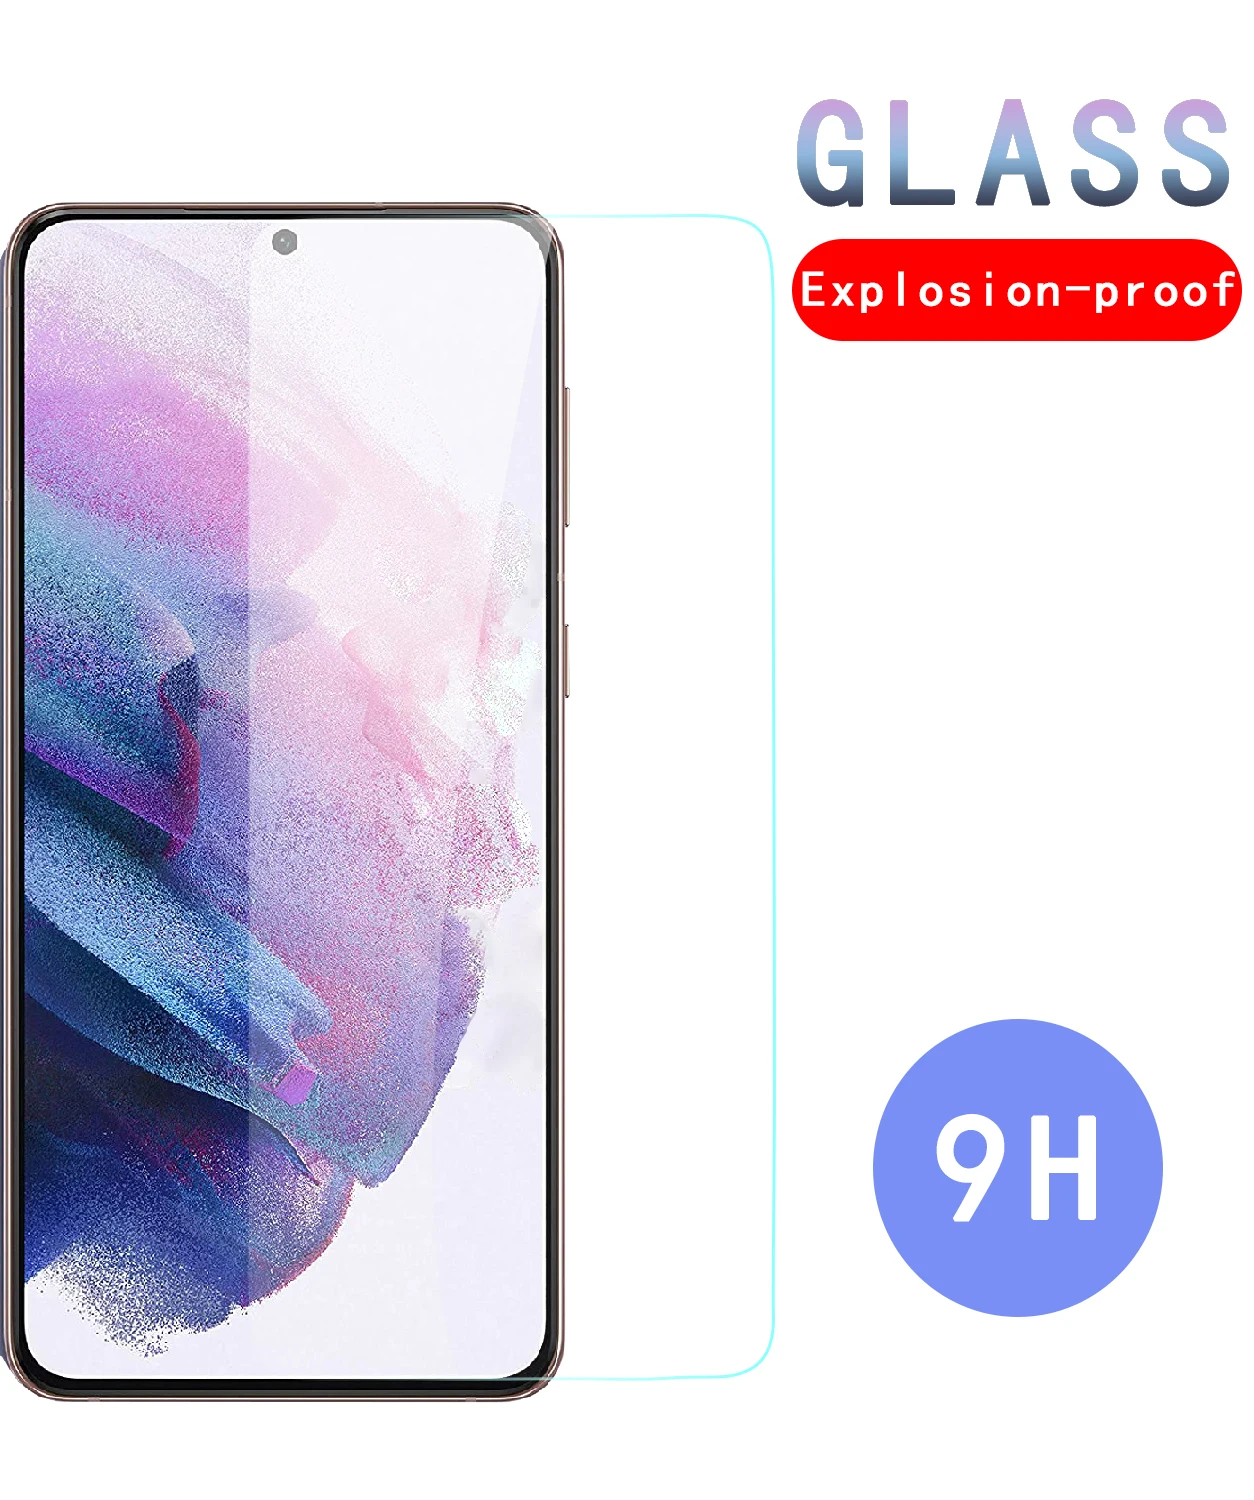 9H Protective Glass For Samsung Galaxy A71 A51 A41 A31 A21S A11 A01 Screen Protector M01 M11 M21 M31 M51 A30 A50 Safety Glass 1 3pcsno fingerprint matte hydrogel film for samsung galaxy m51 m31 a71 m21 m11 a51 a70 a31 m30 a40 a50 a72 a41 screen protector